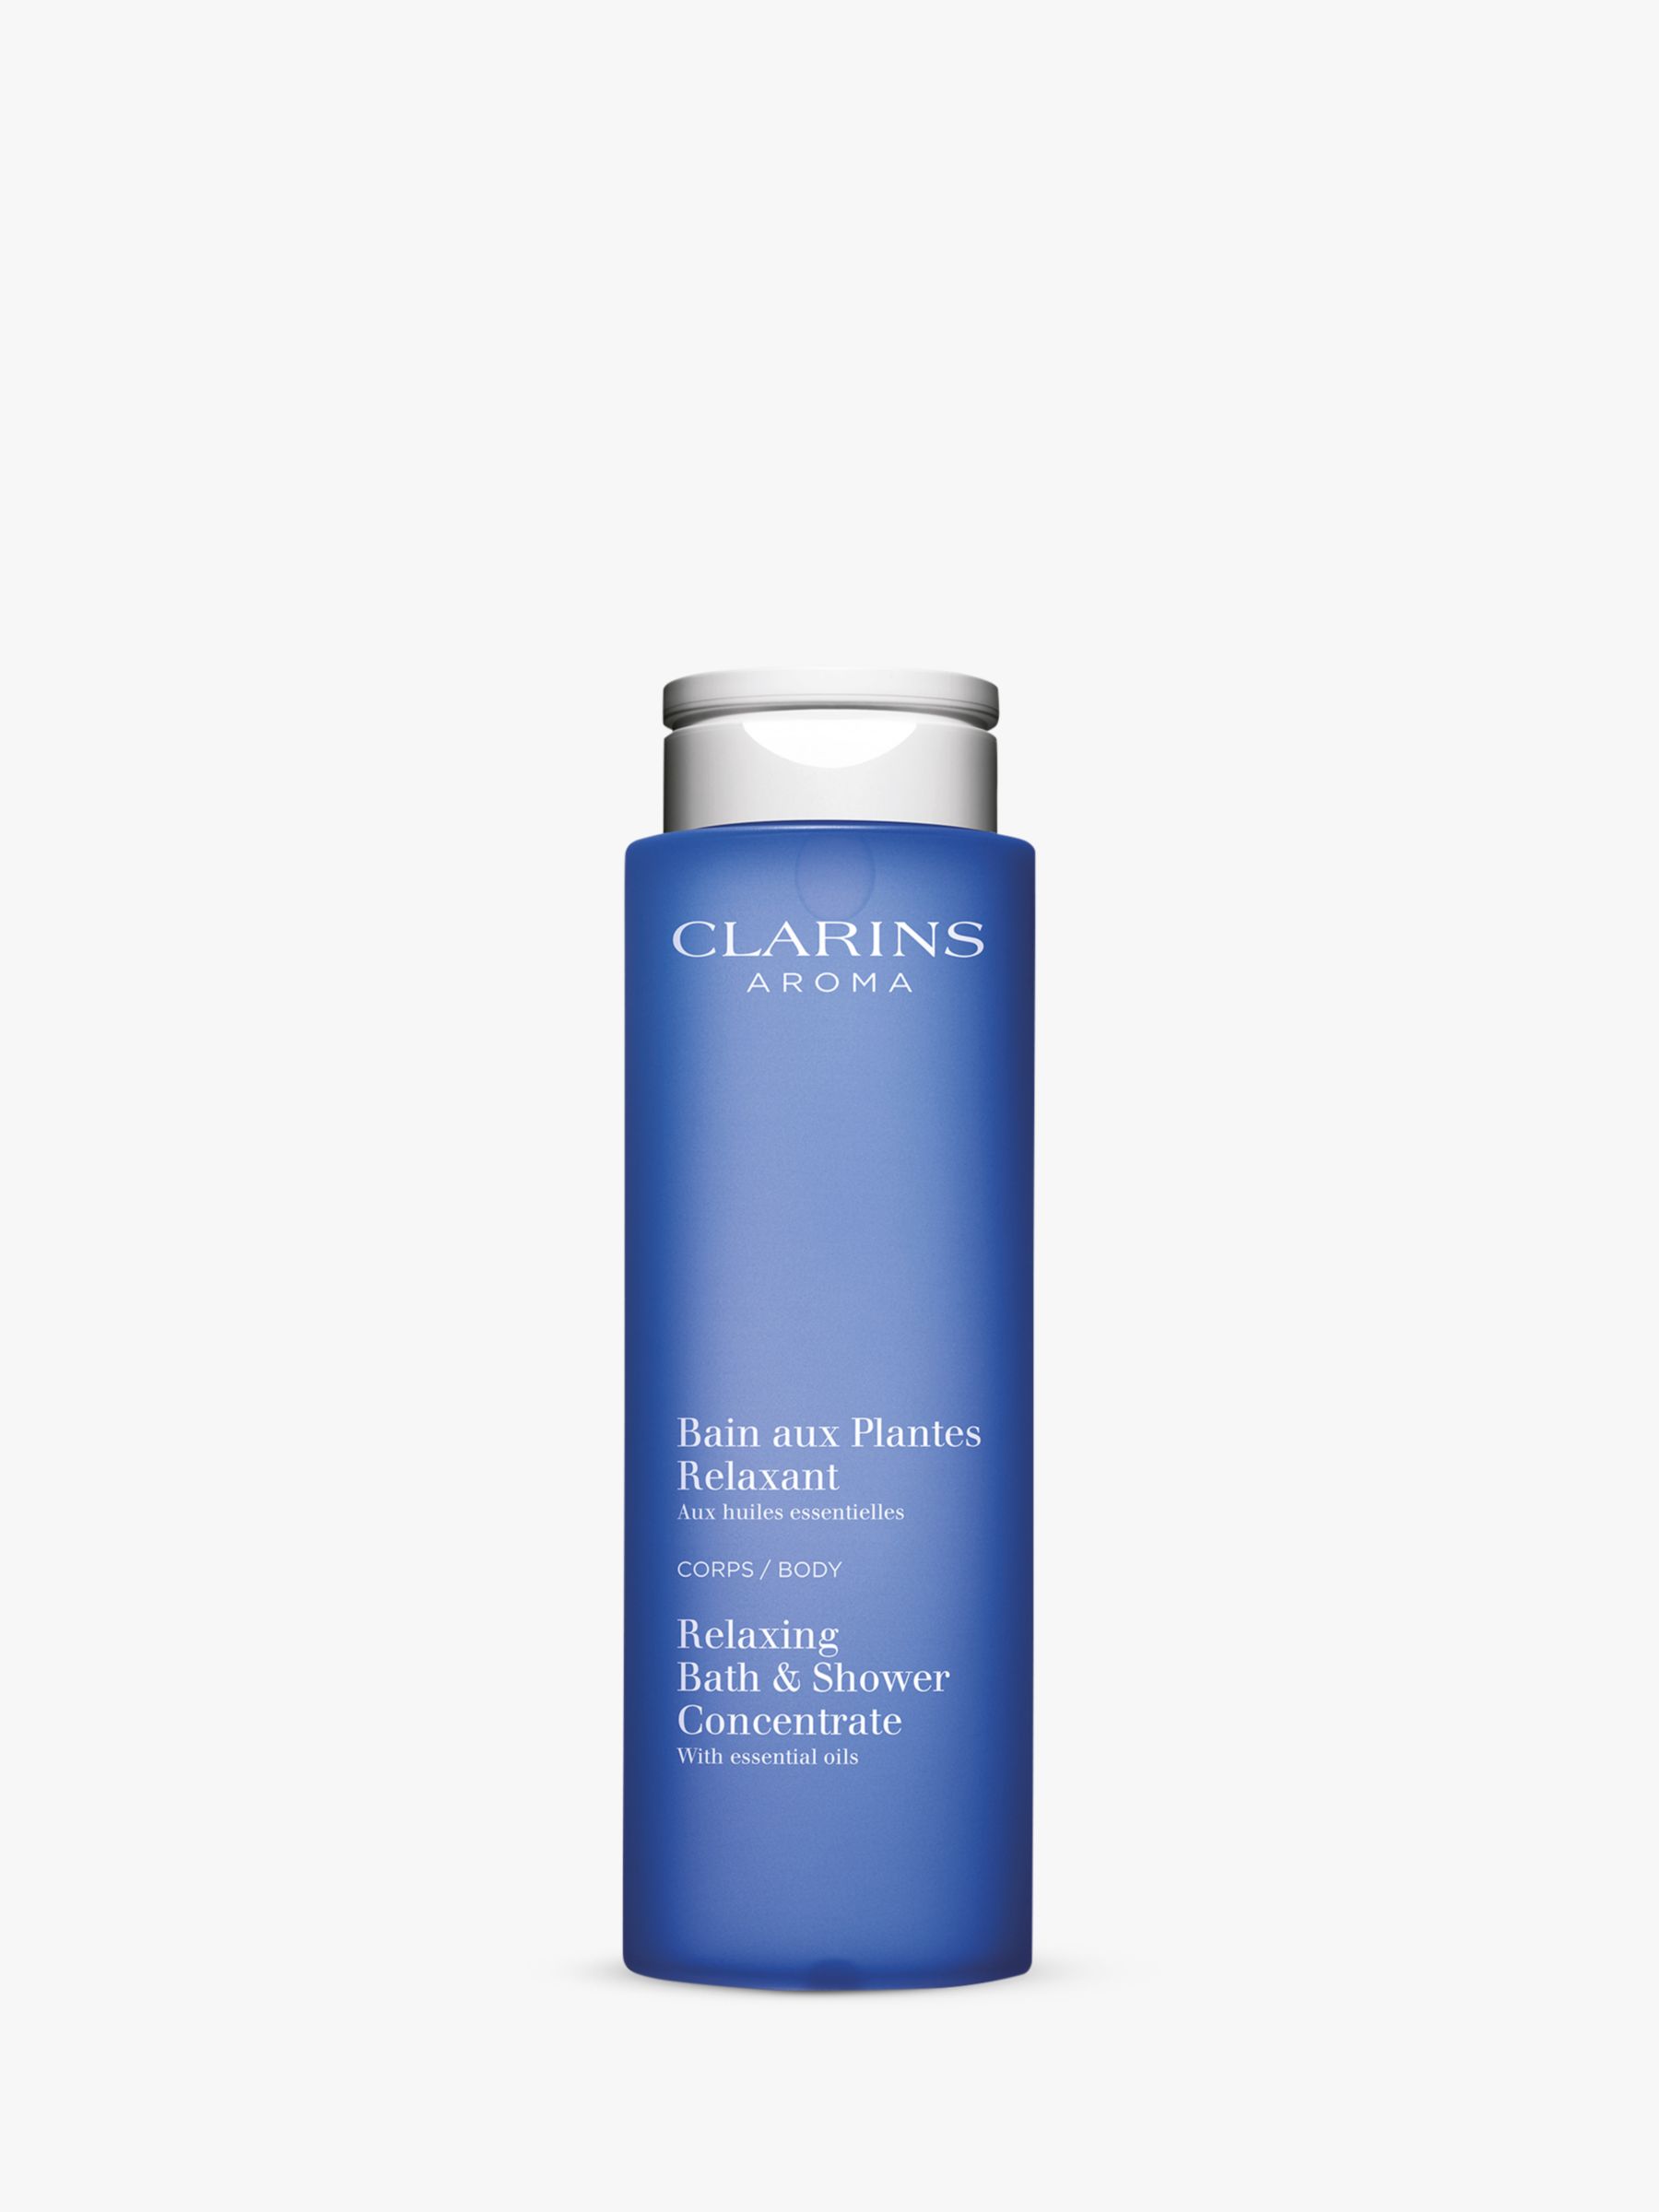 Clarins Relaxing Bath & Shower Concentrate, 200ml 1